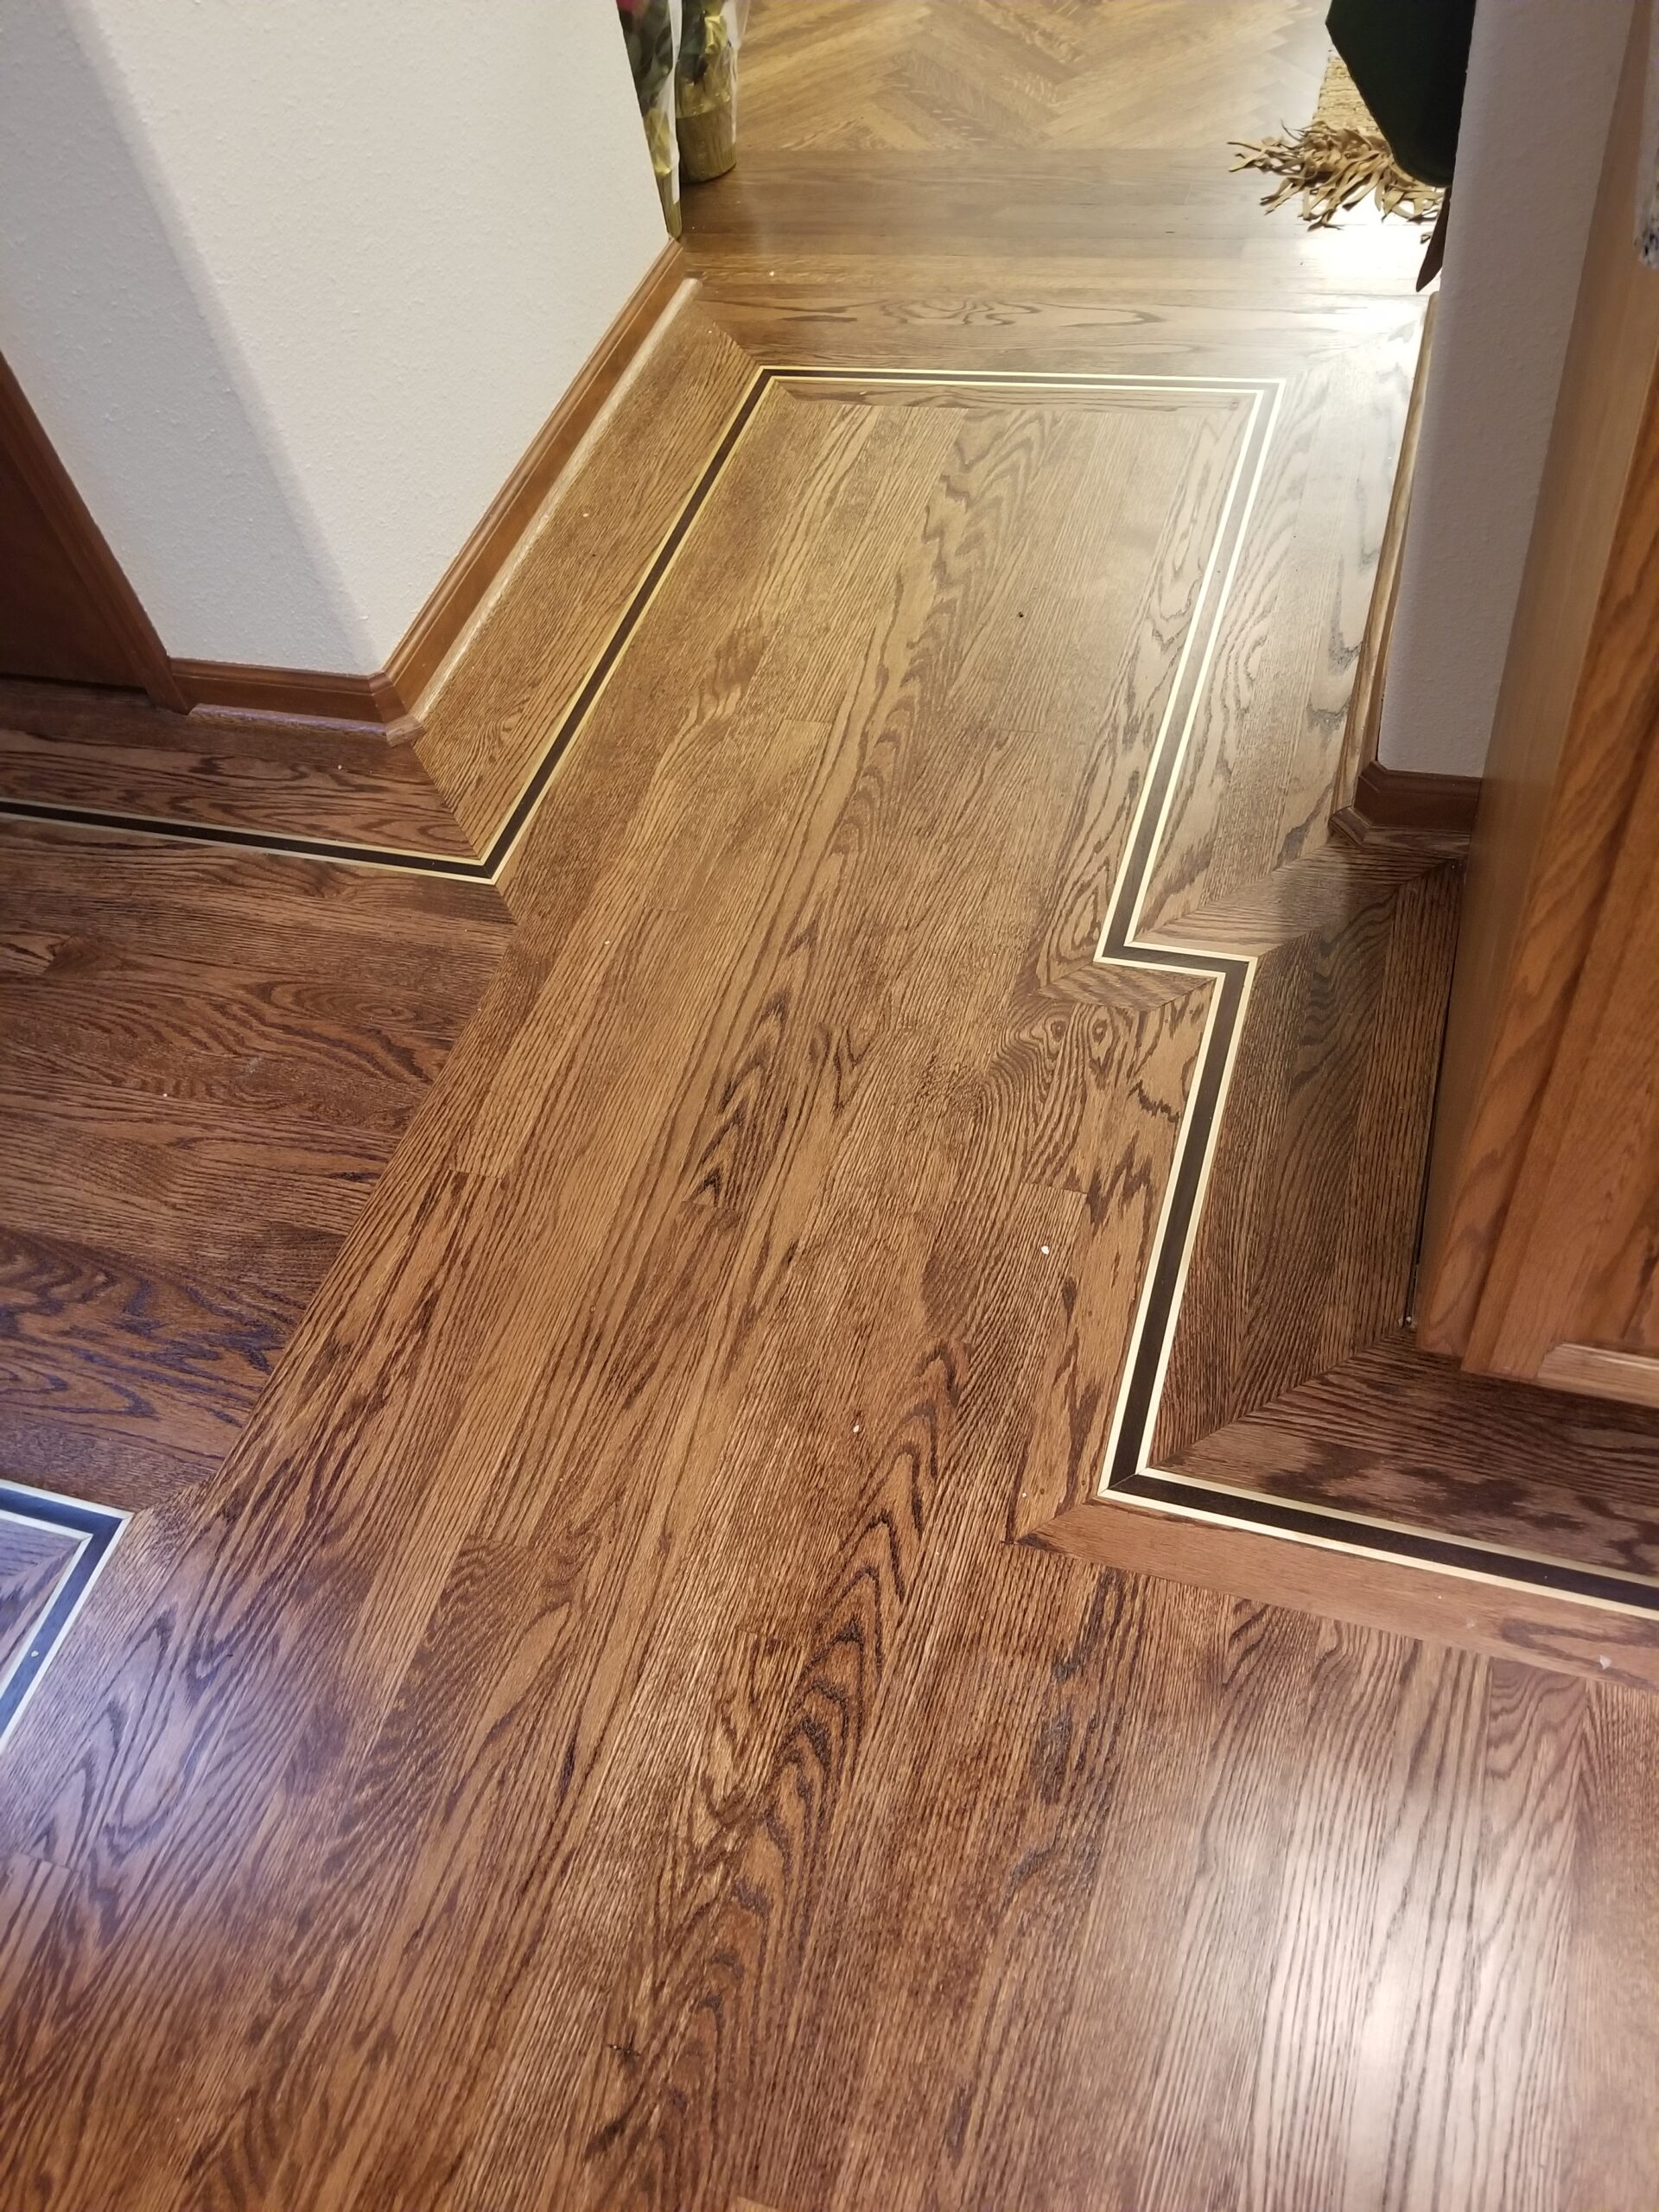 SandedSanded, prepped  and custom stain with gunsmoke royal mahogany with water-based semi-gloss finish to Los Altos hallways and bedrooms. Different view., prepped  and custom stain with gunsmoke royal mahogany with water-based semi-gloss finish to Los Altos hallways and bedrooms. 